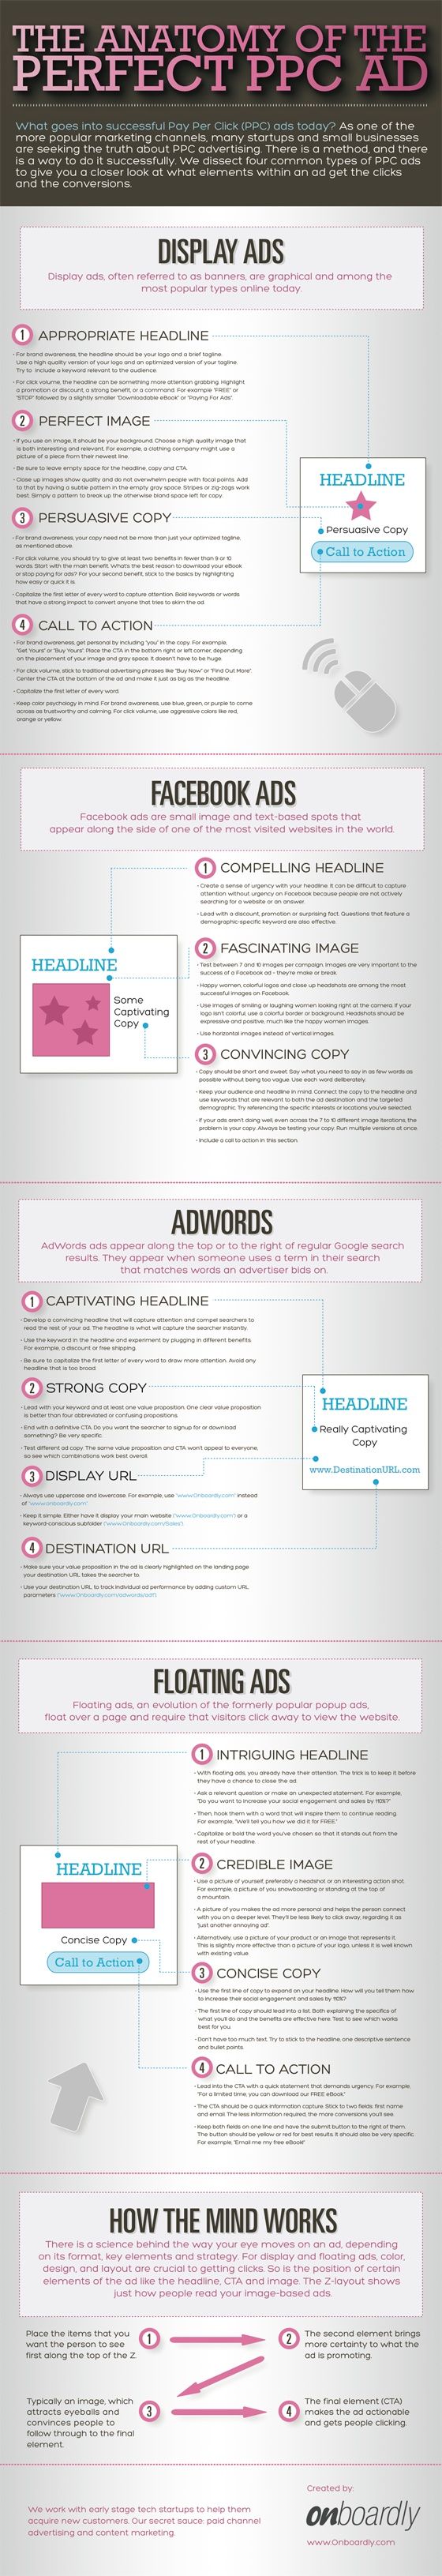 Advertising-Infographics-The-Anatomy-Of-The-Perfect-PPC-AD-Adwords Advertising Infographics : The Anatomy Of The Perfect PPC AD